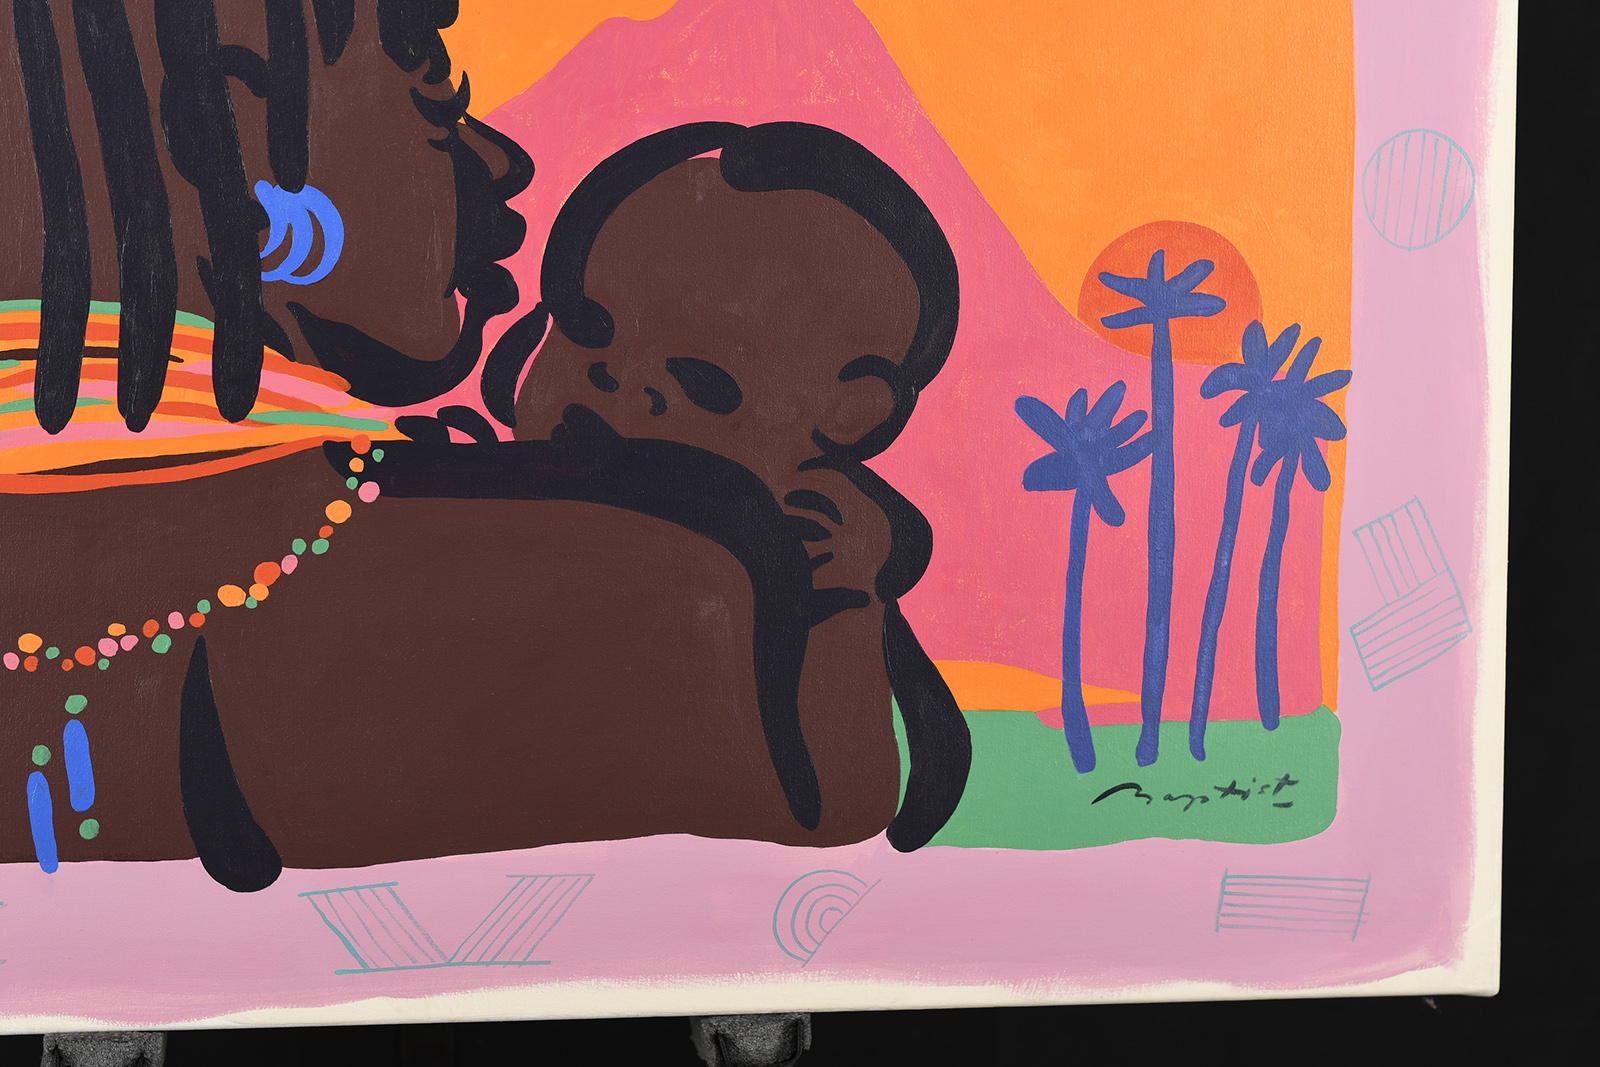 Original Painting by Gerry Baptist Titled "First Born" - Image 7 of 8